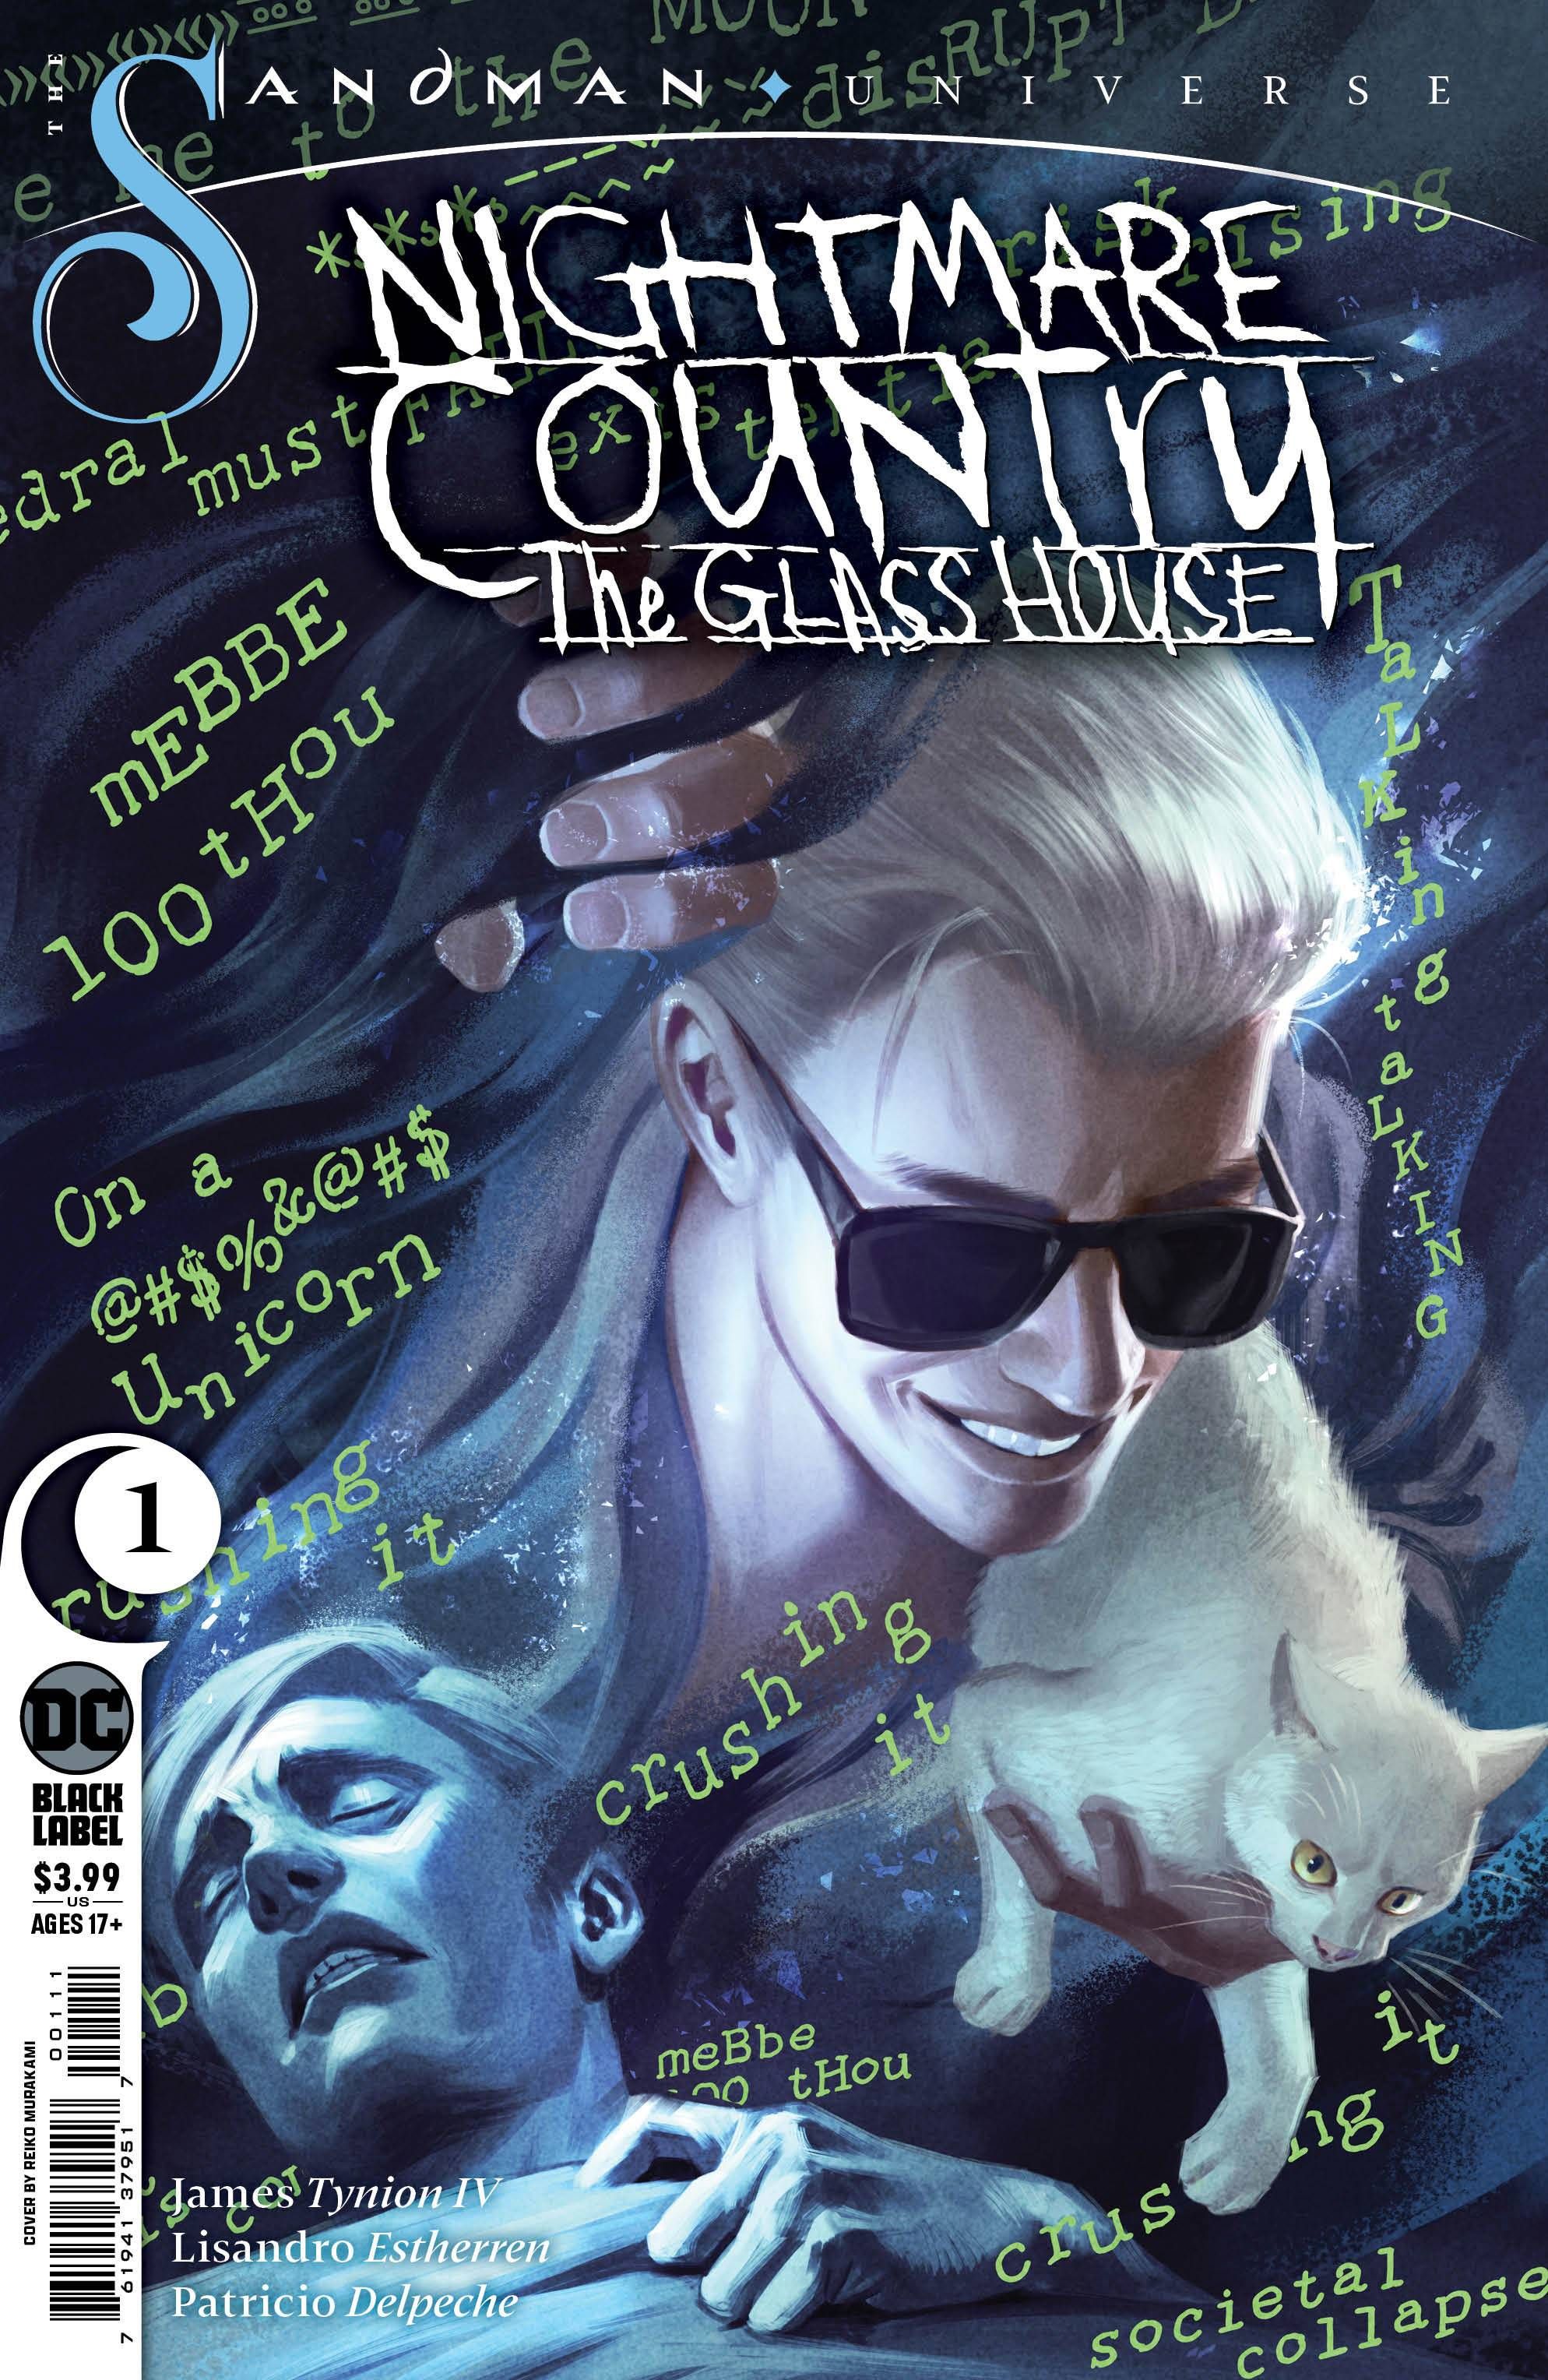 The Sandman Universe Nightmare Country - The Glass House #1